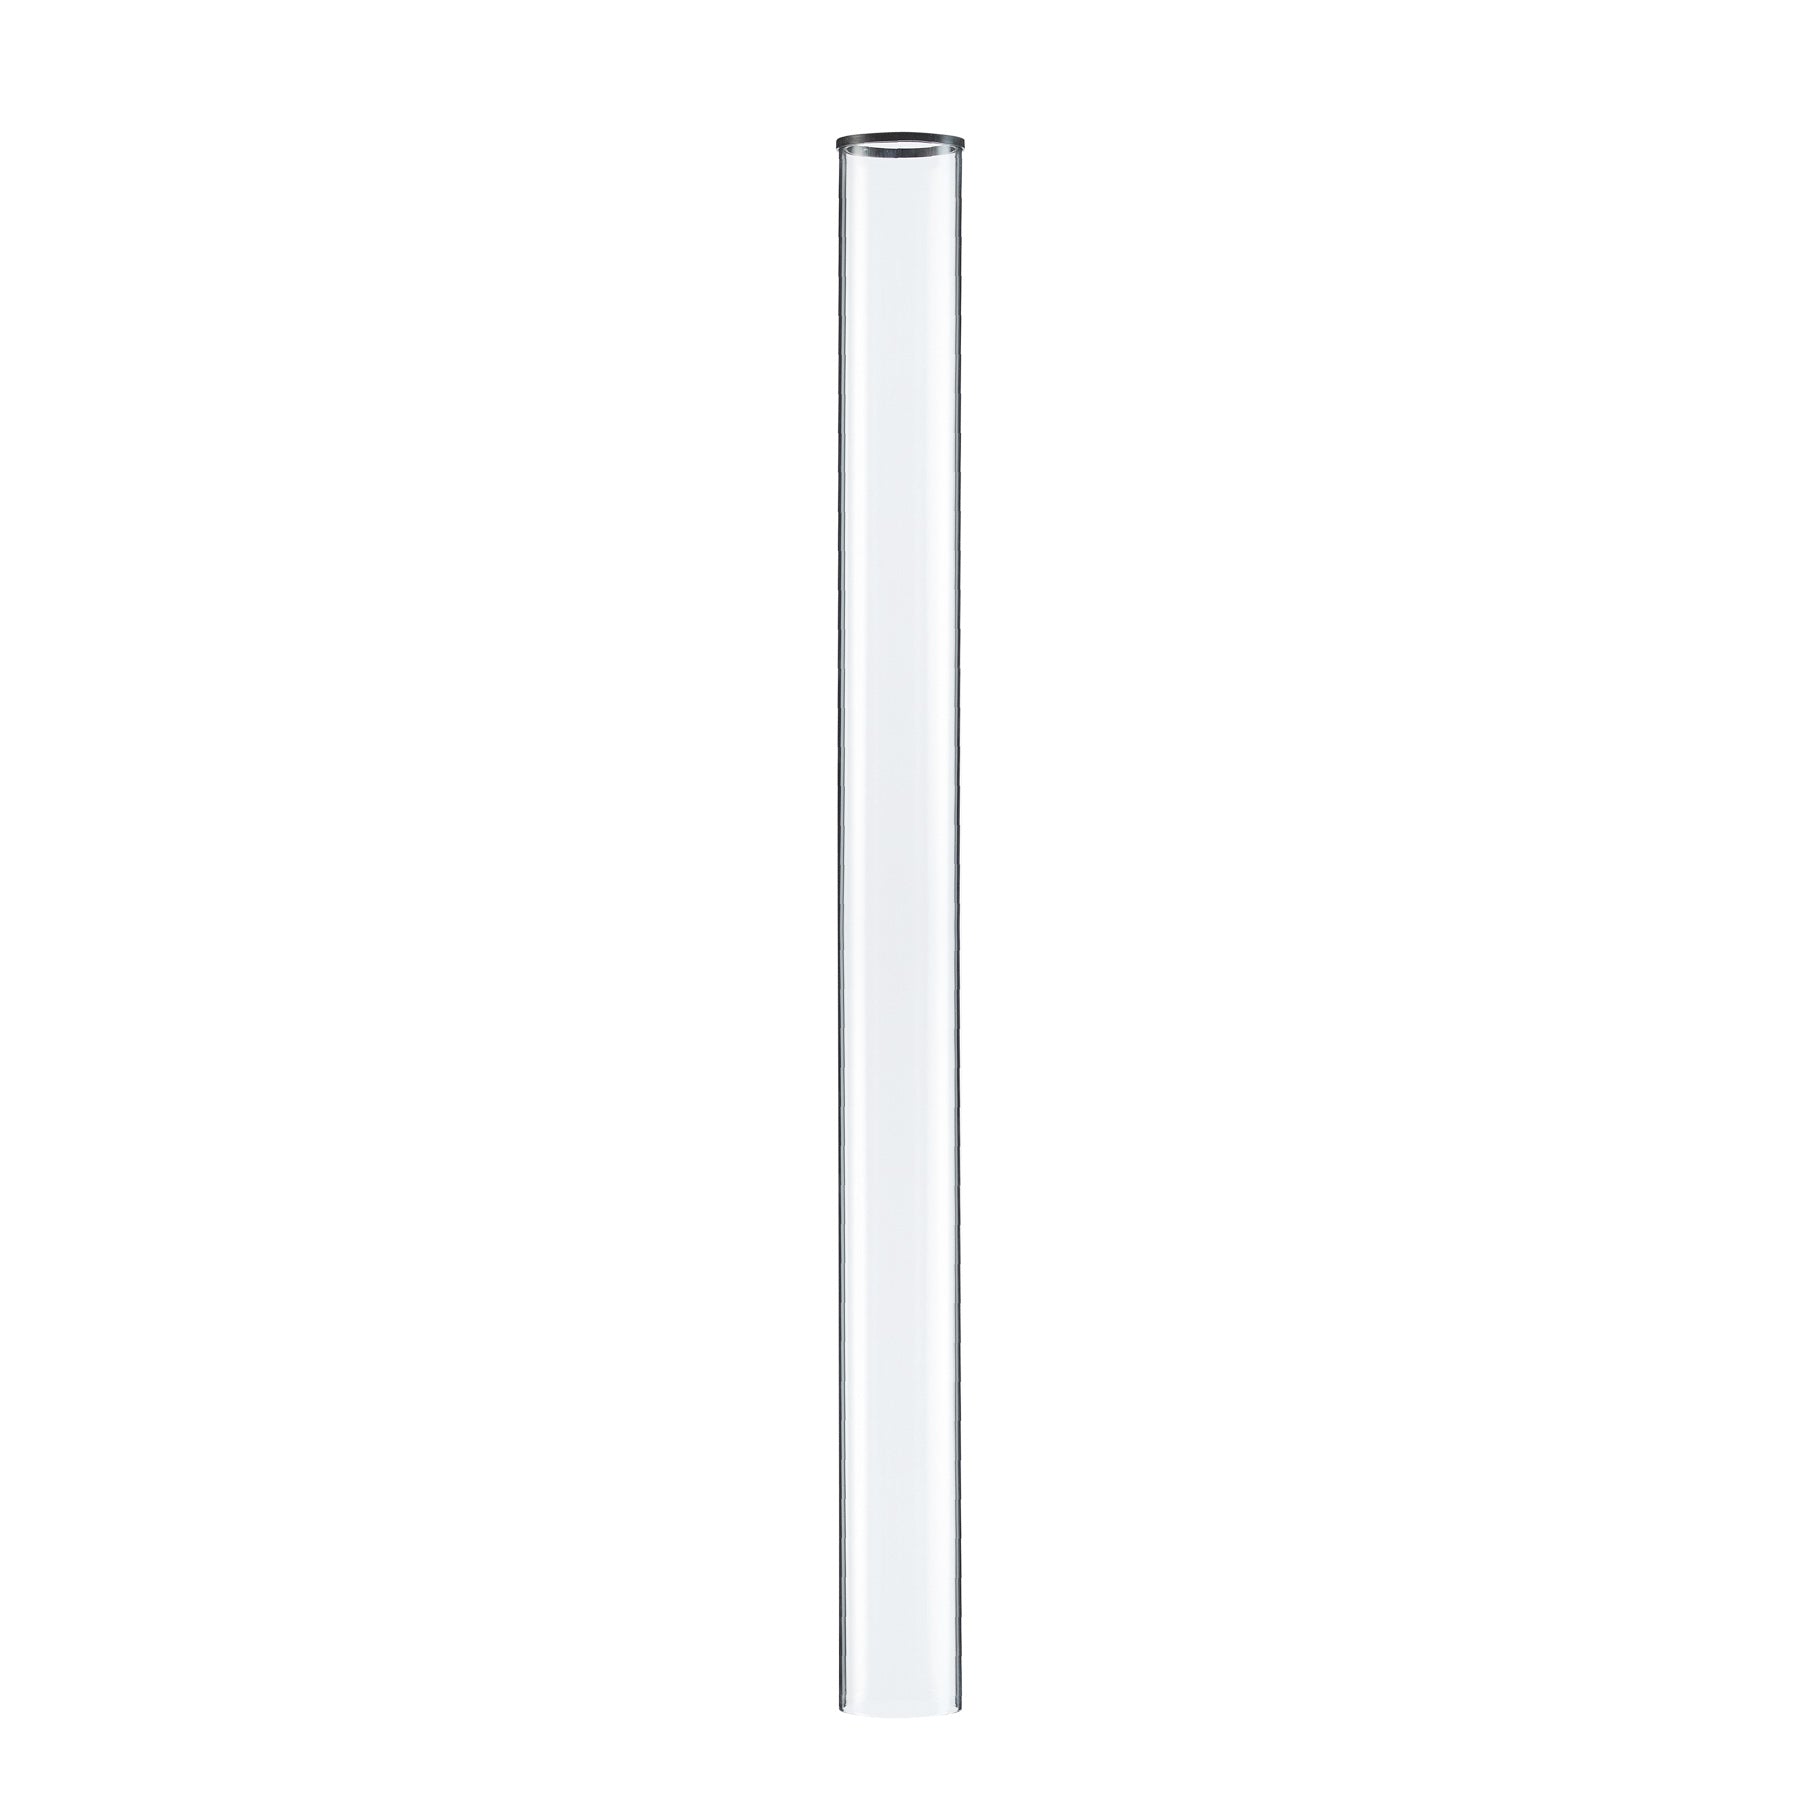 Quartz Tube with Rubber Seal – Signature Flame Tower